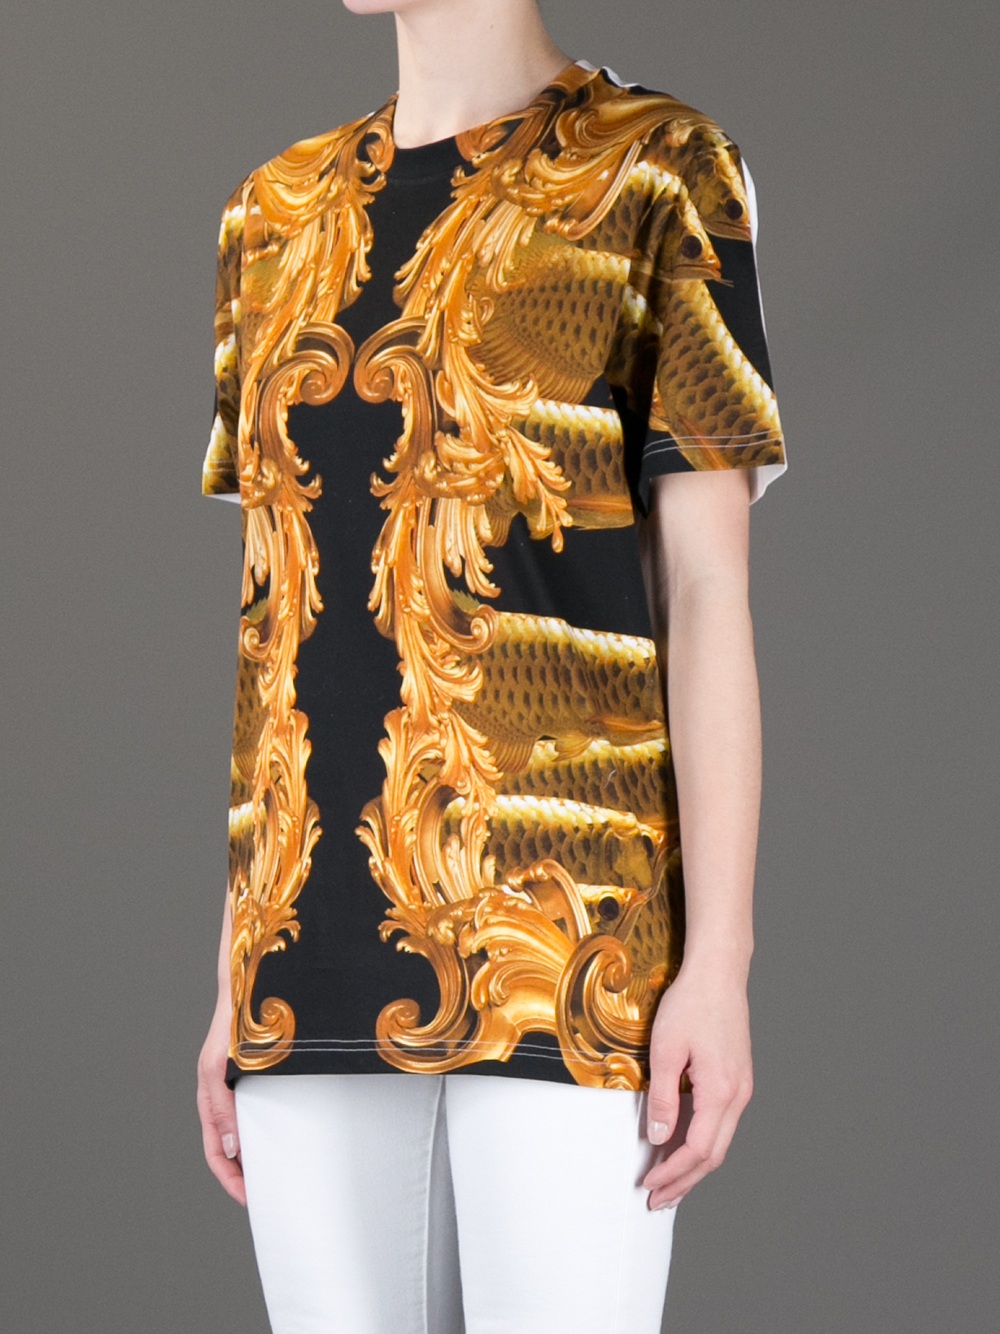 Lyst - Katie Eary Baroque style Print T-shirt in Yellow for Men